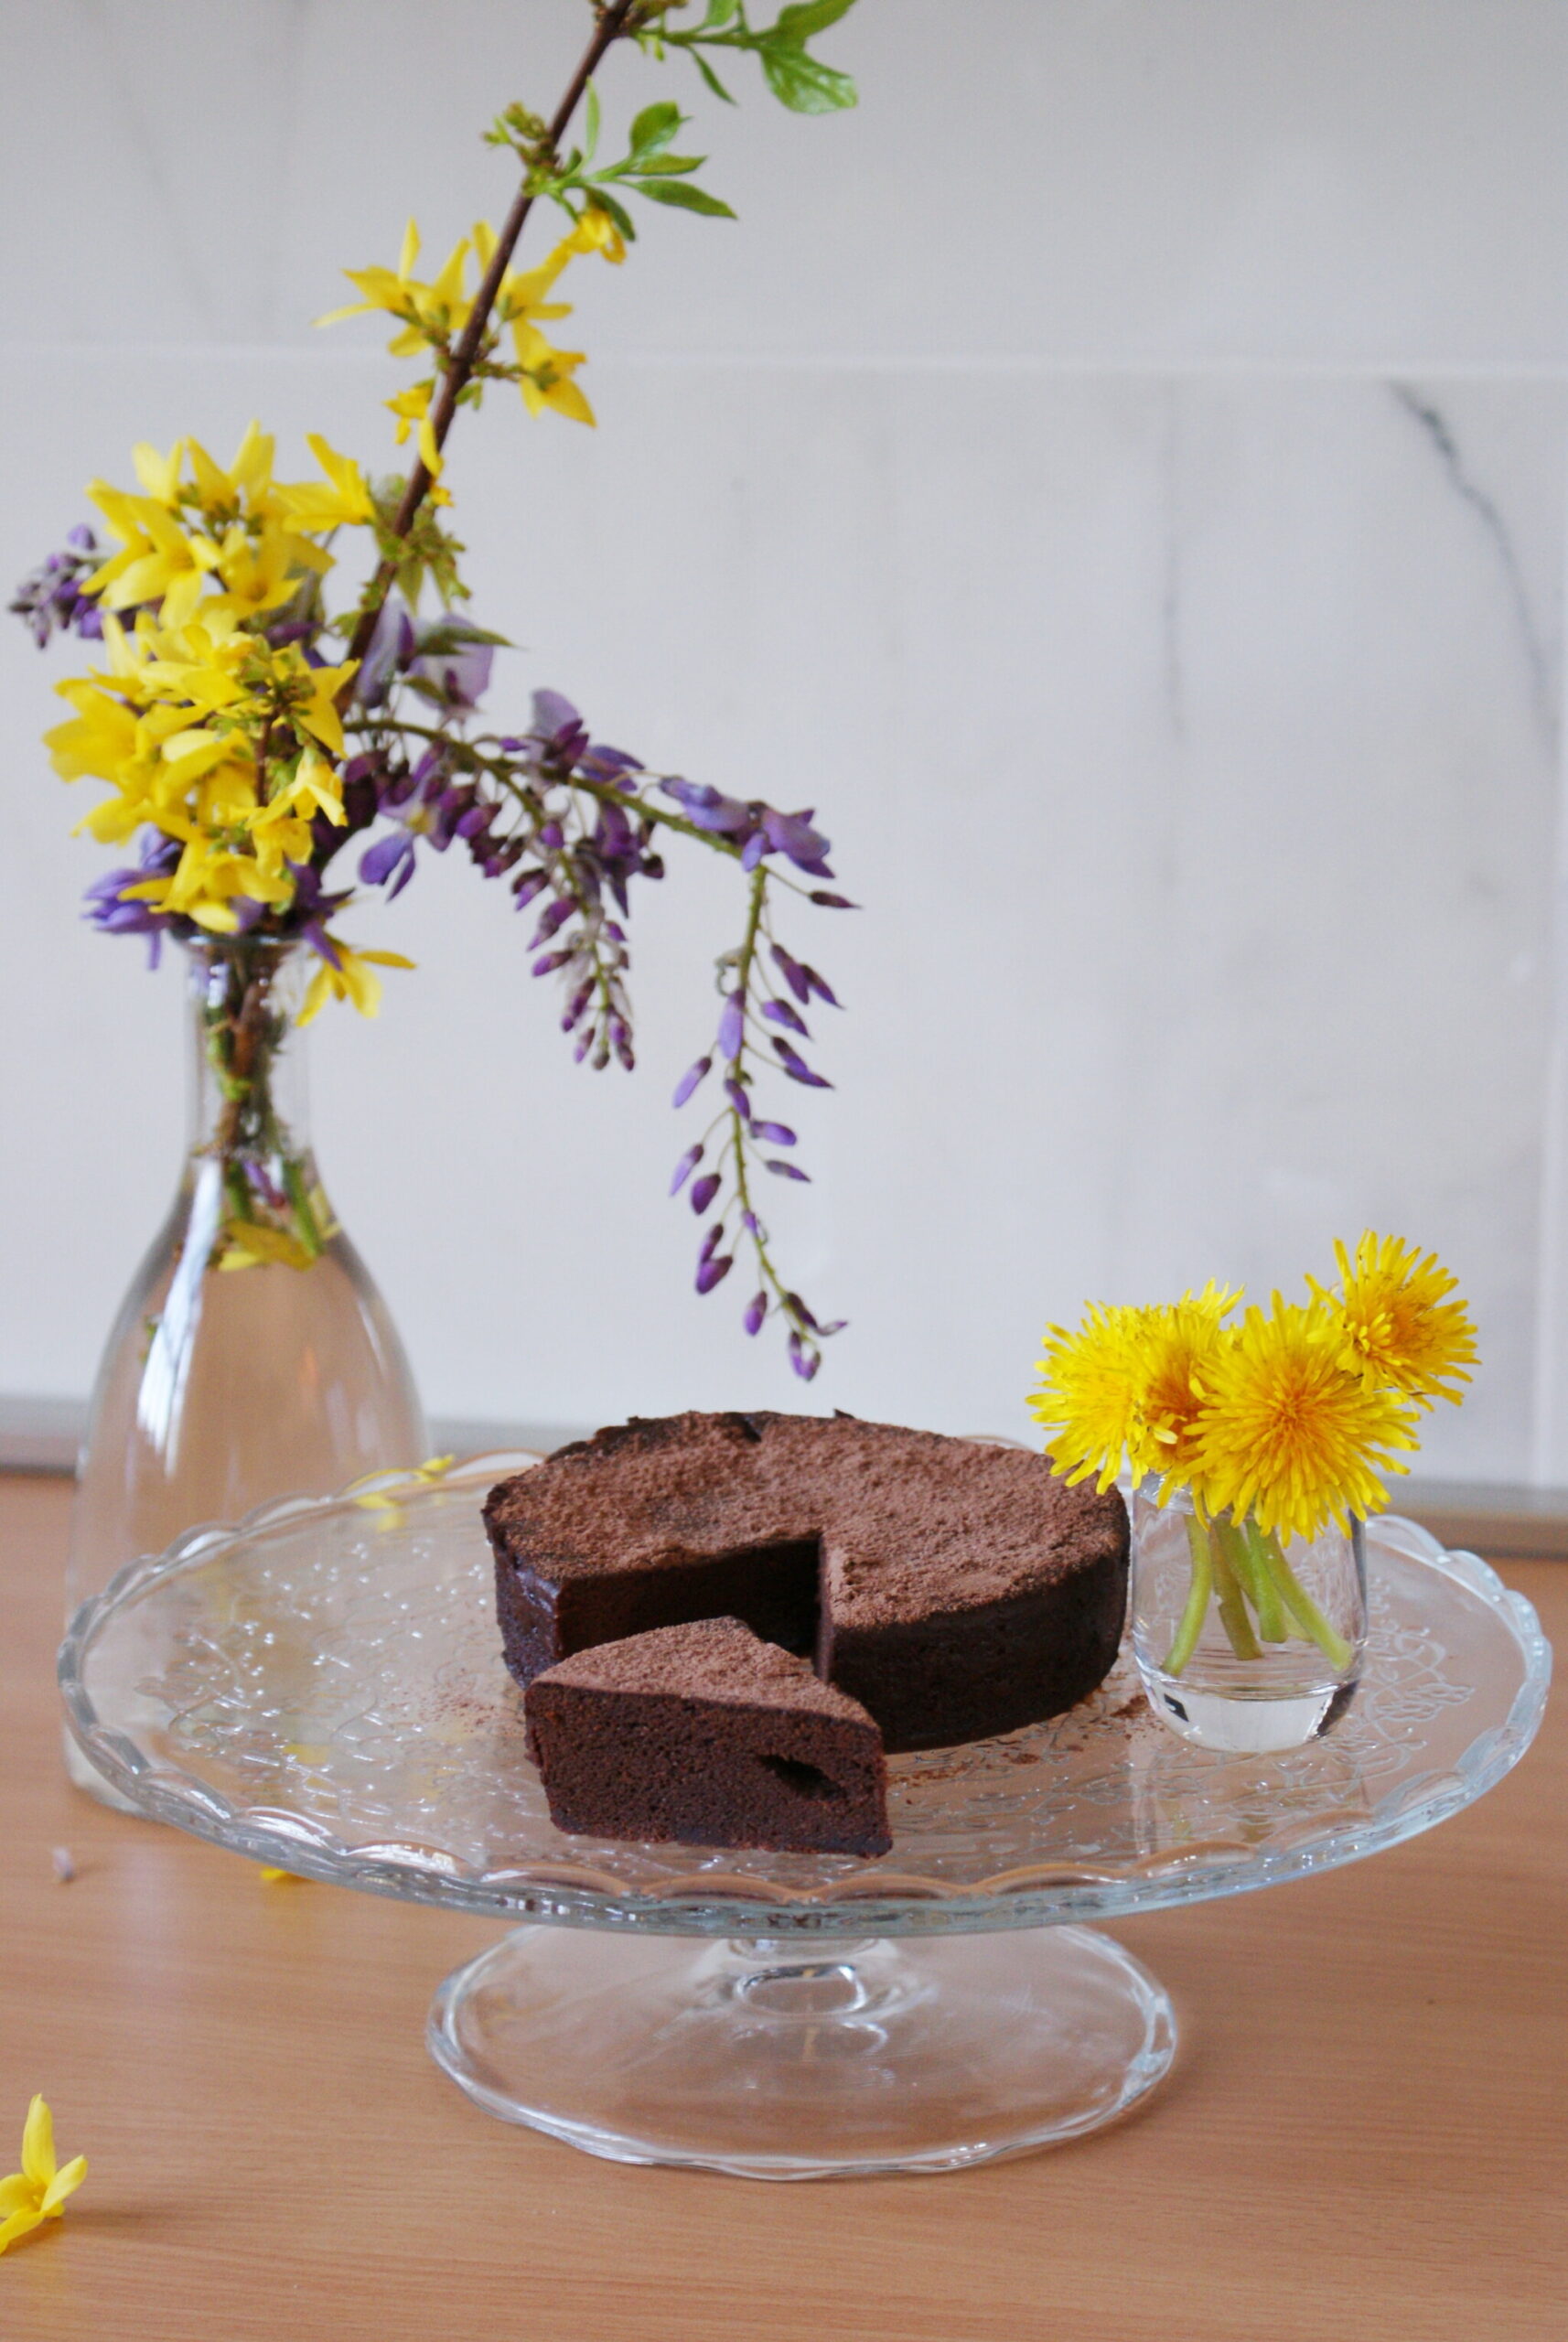 10 MINUTE MICROWAVE CHOCOLATE CAKE RECIPE (BAKE TIME INCLUDED!)